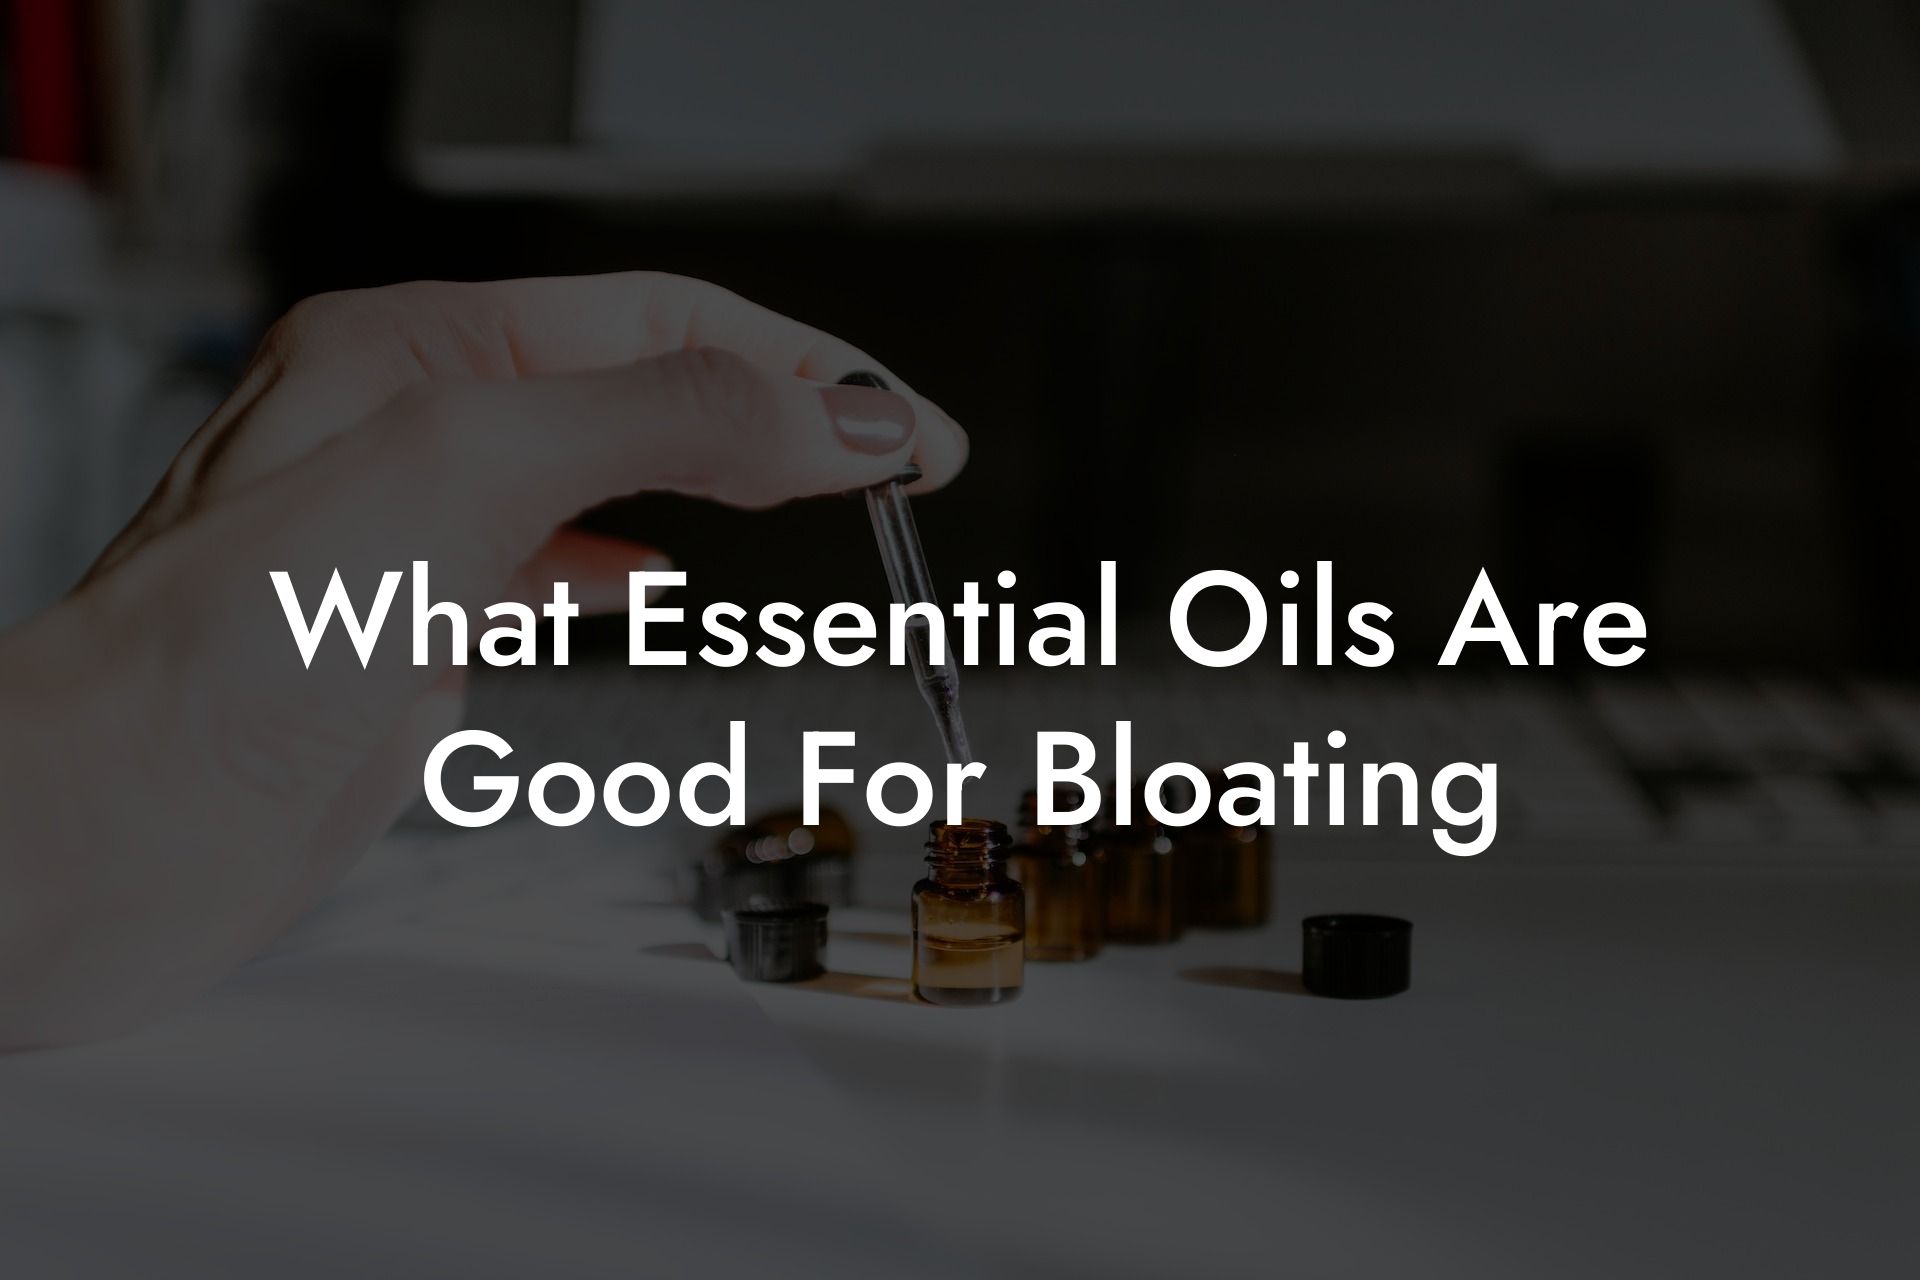 What Essential Oils Are Good For Bloating